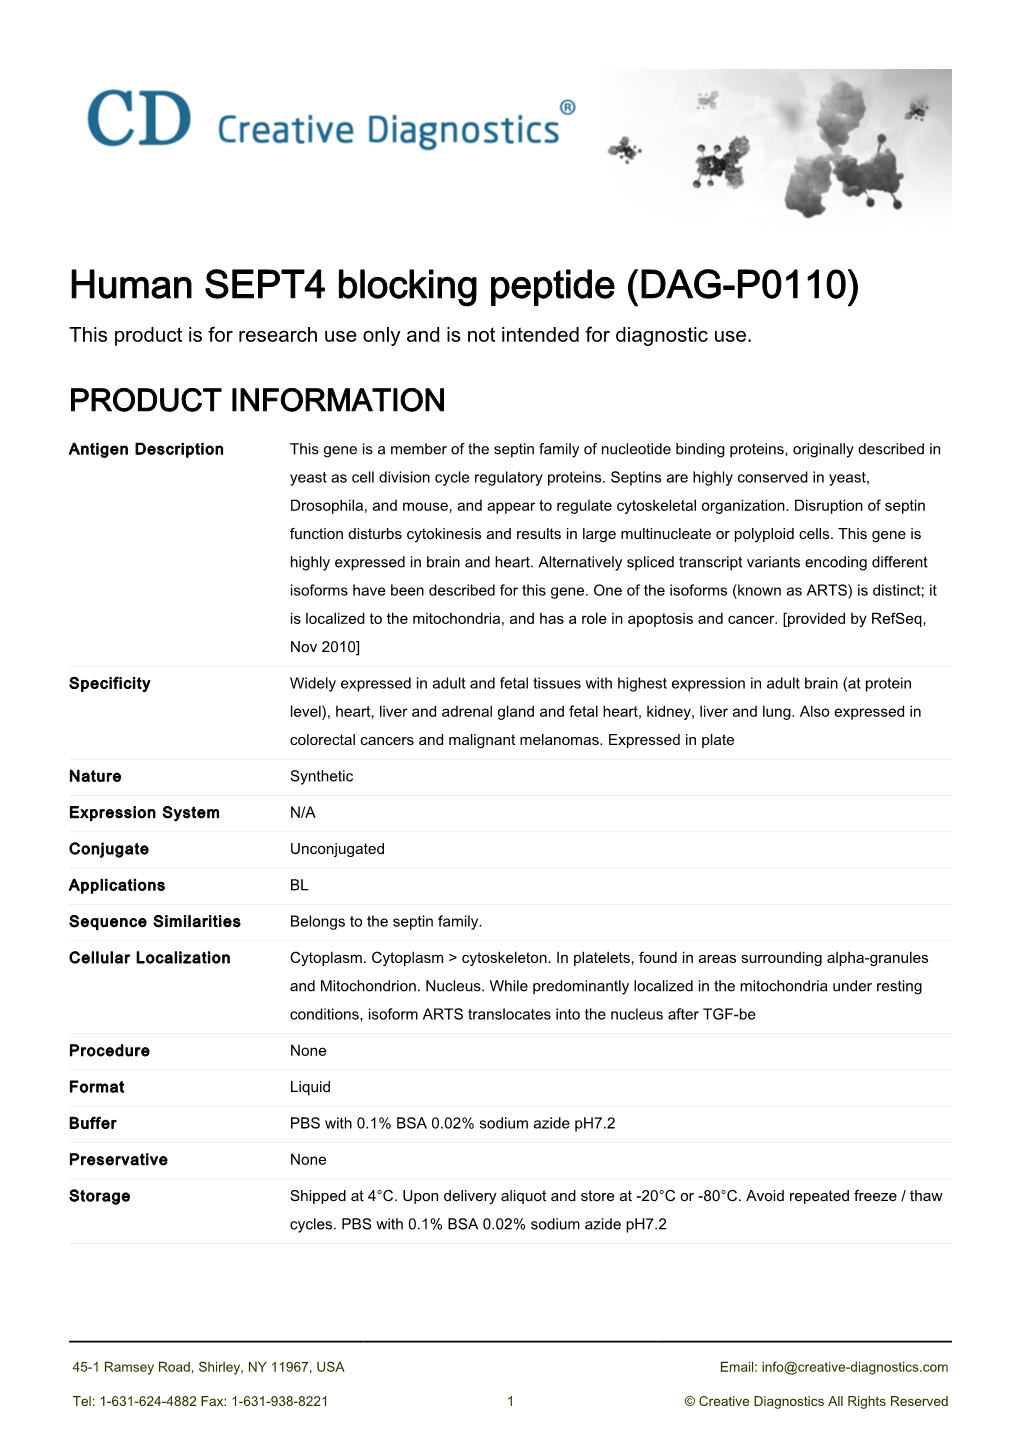 Human SEPT4 Blocking Peptide (DAG-P0110) This Product Is for Research Use Only and Is Not Intended for Diagnostic Use